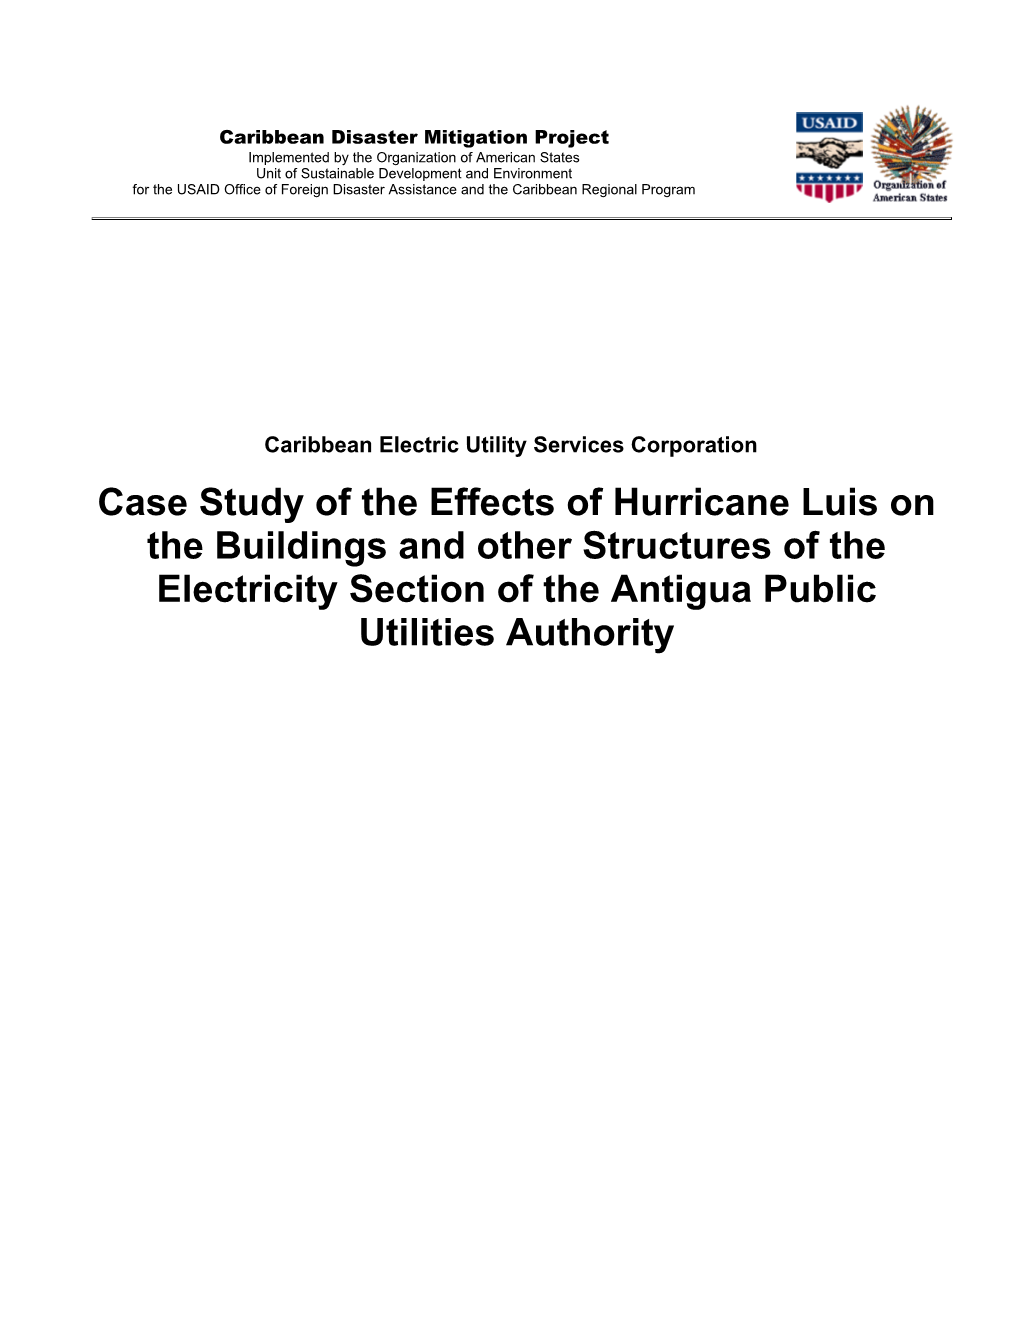 Case Study of the Effects of Hurricane Luis on the Buildings and Other Structures of the Electricity Section of the Antigua Public Utilities Authority 1996-02-23